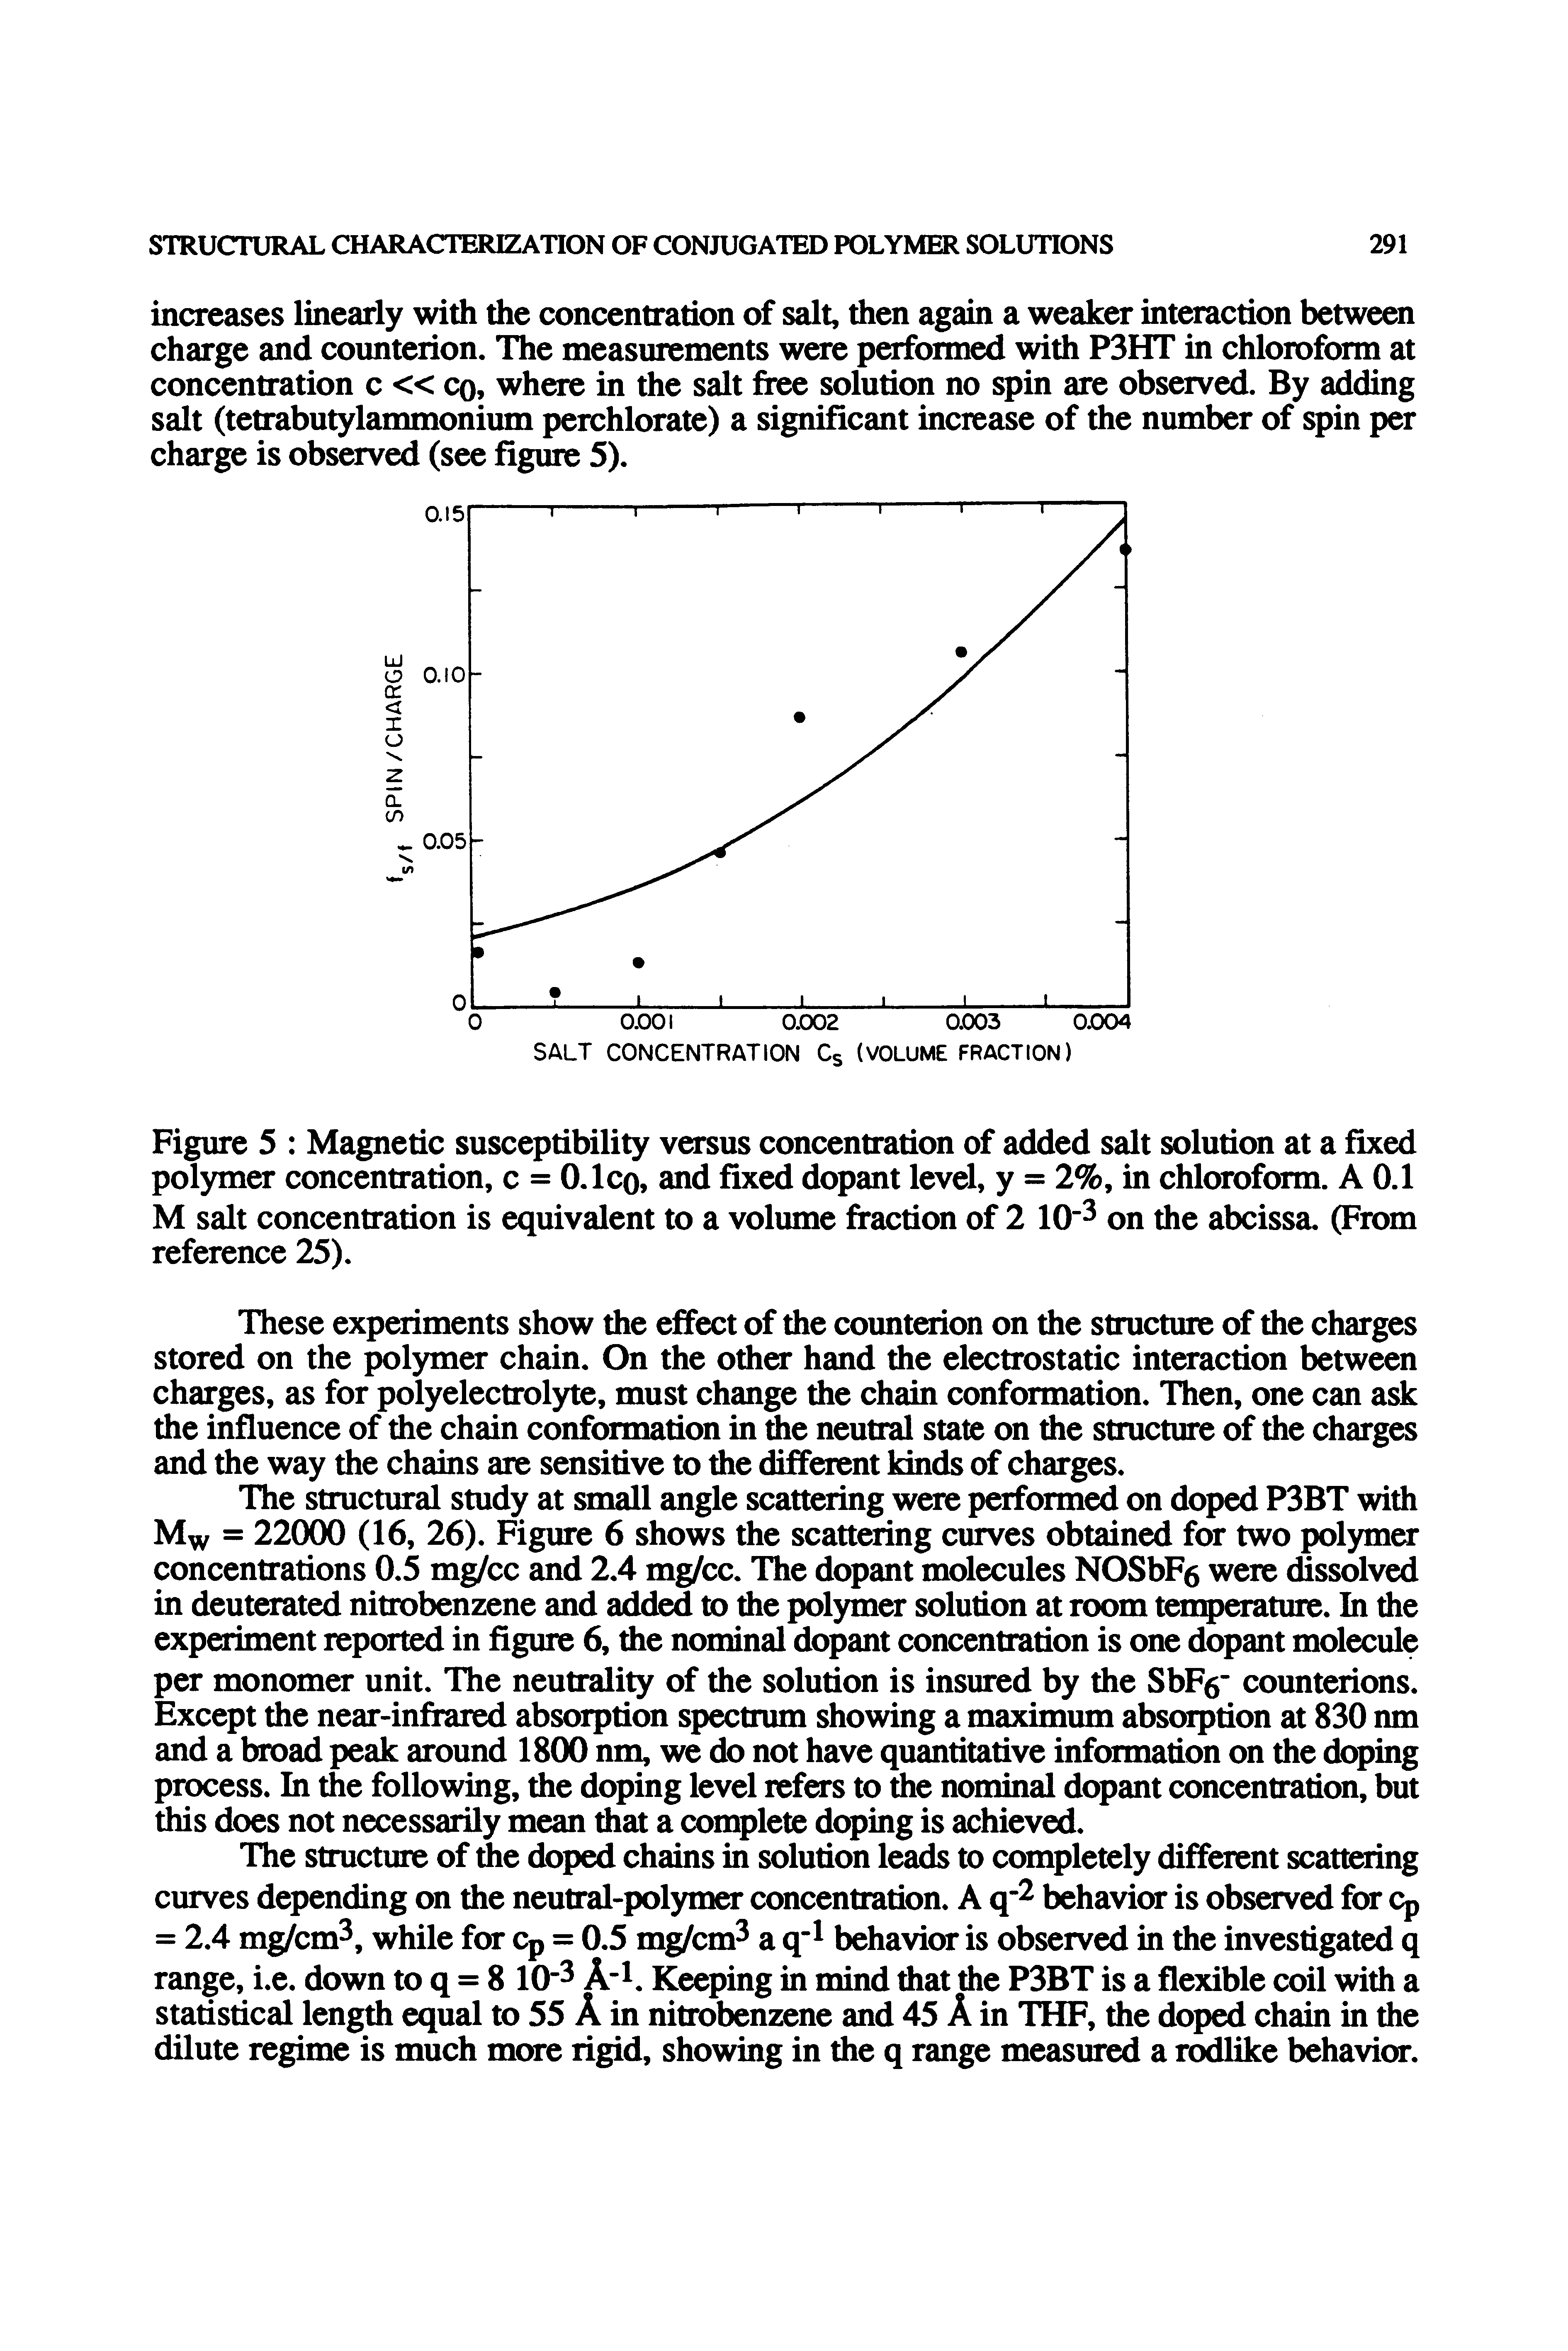 Figure 5 Magnetic susceptibility versus concentration of added salt solution at a fixed polymer concentration, c = O.Icq, and fixed dopant level, y = 2%, in chloroform. A 0.1 M salt concentration is equivalent to a volume fraction of 2 10 3 on the abcissa. (From reference 25).